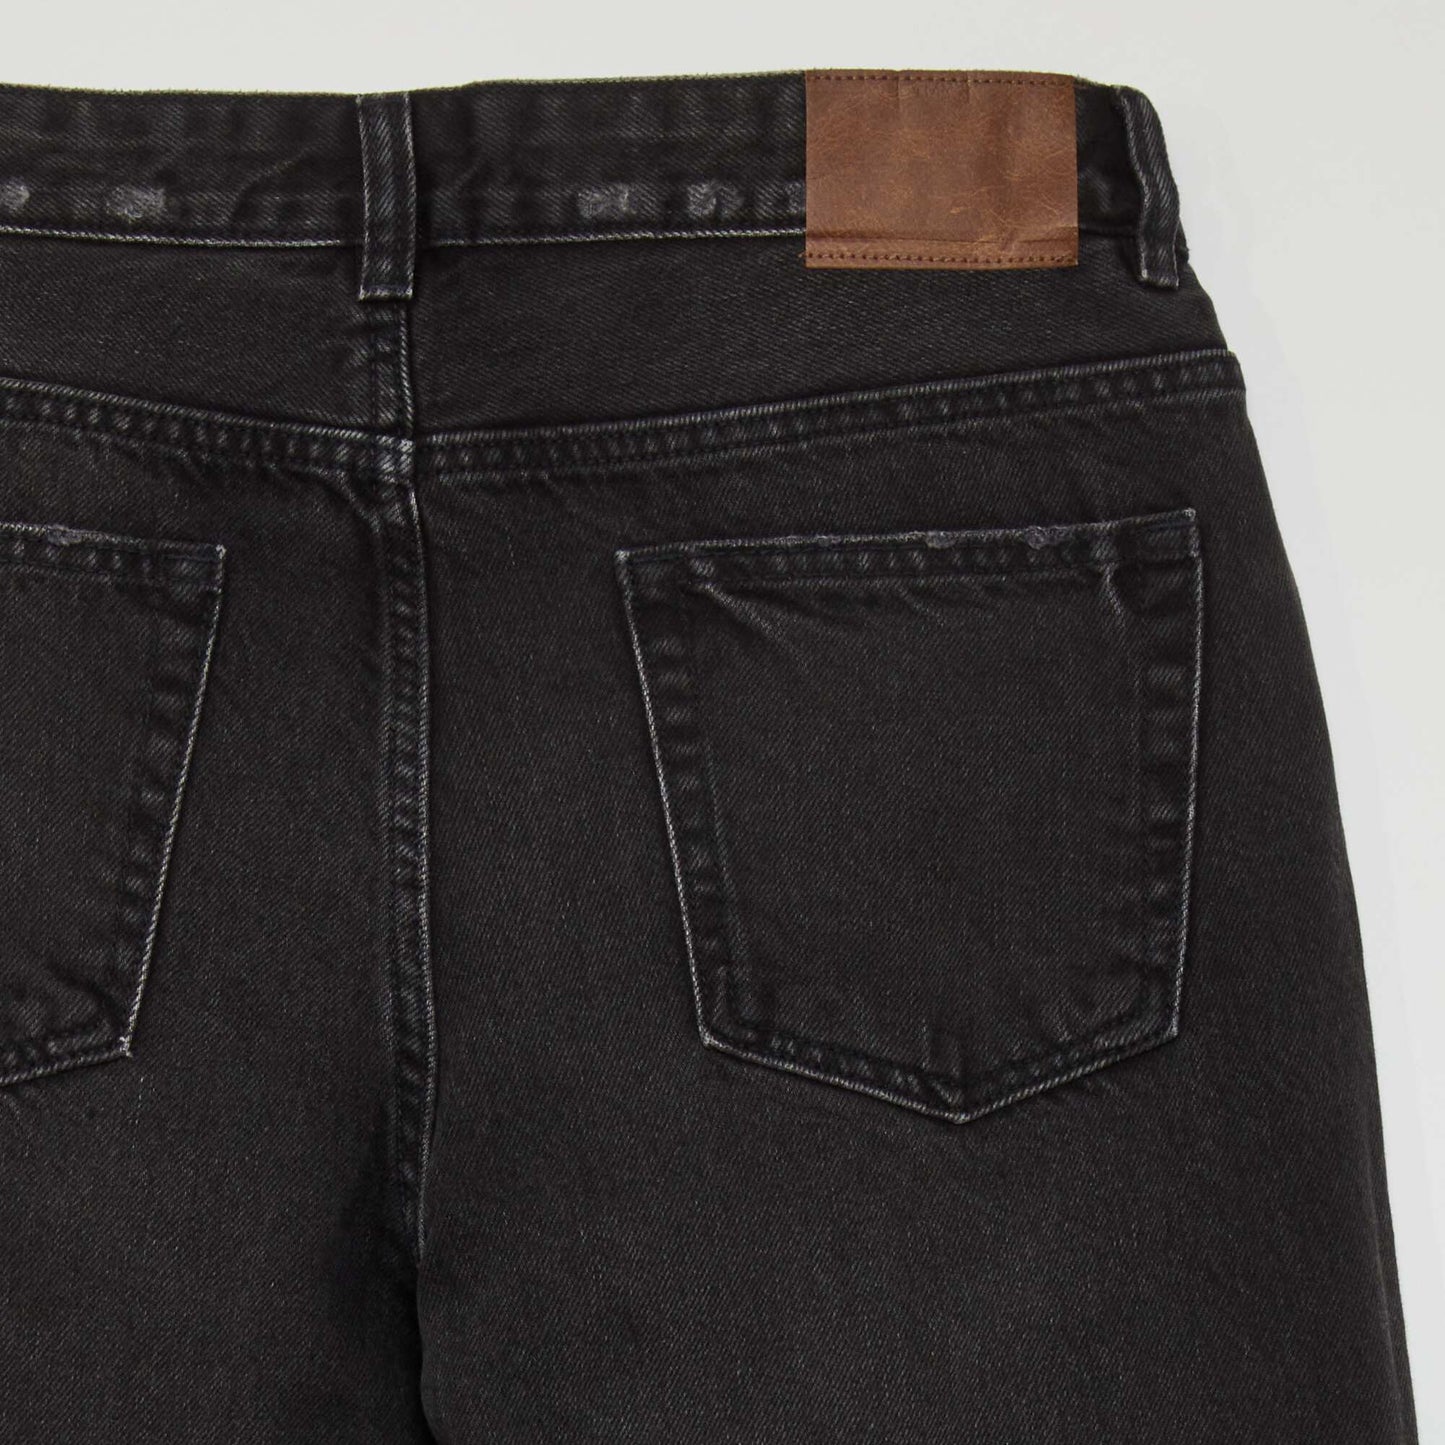 5-pocket straight-leg jeans with faded effect on the thighs BLACK